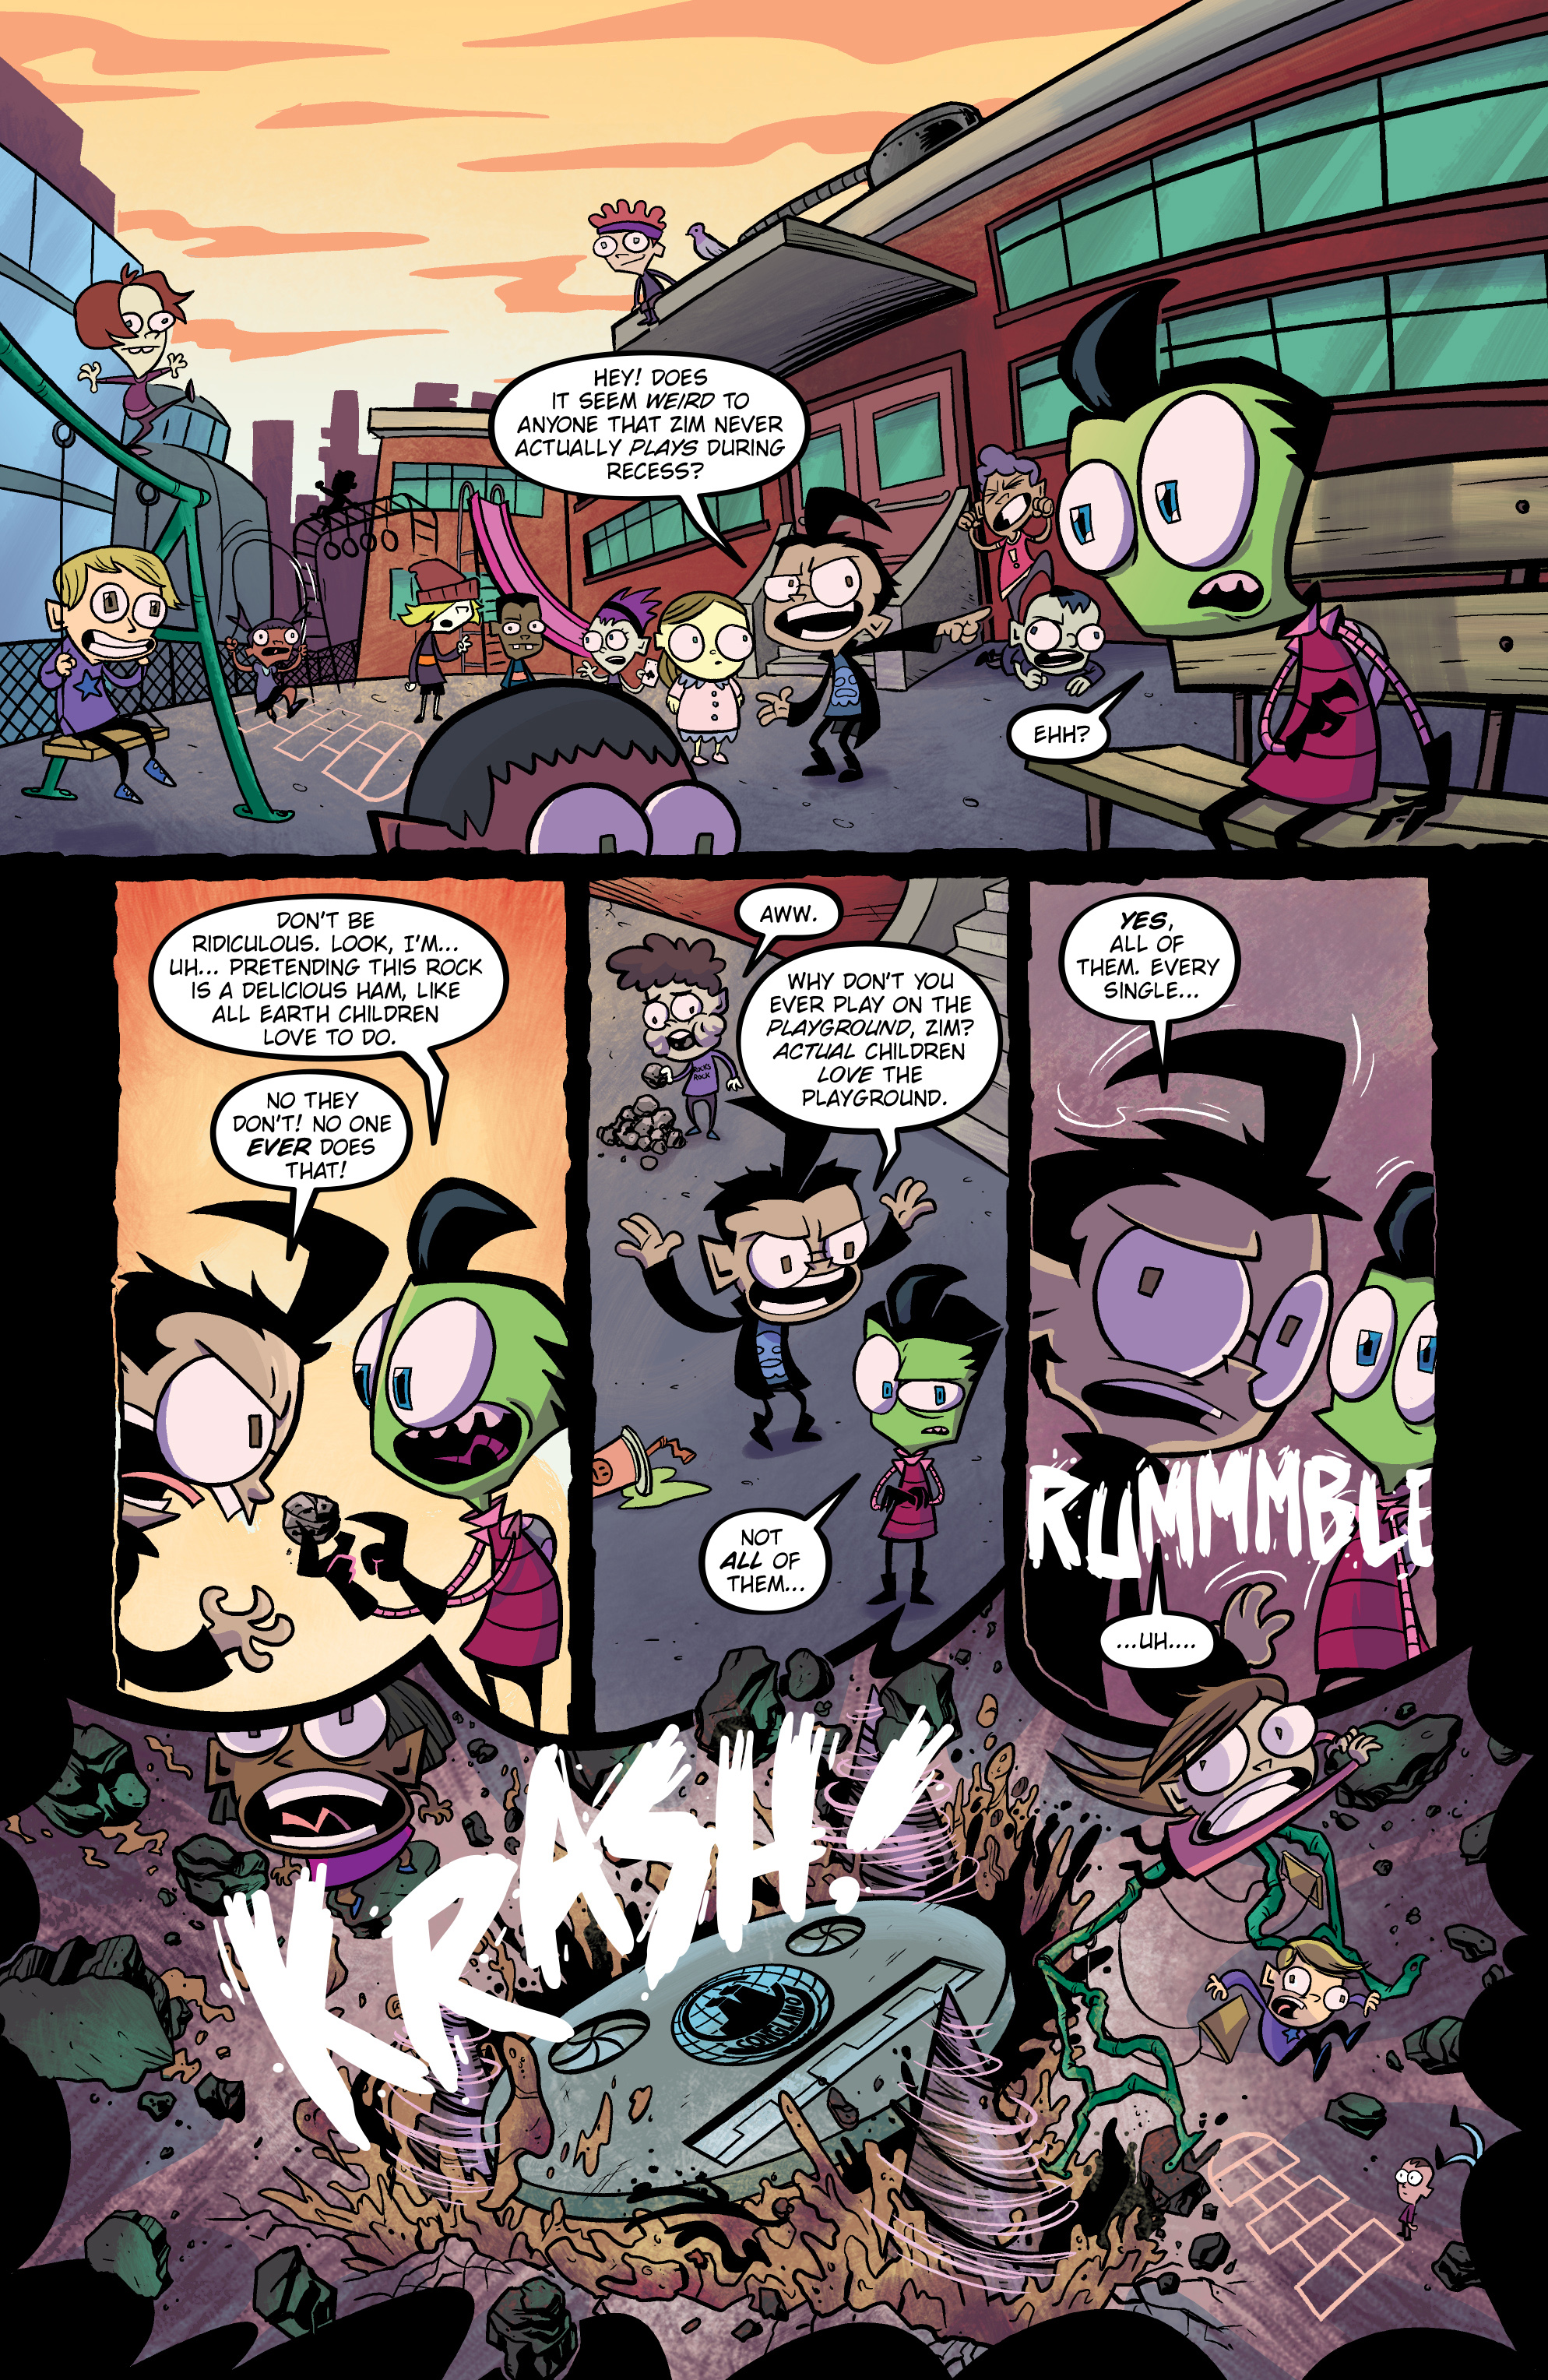 Invader Zim (2015-): Chapter 33 - Page 3